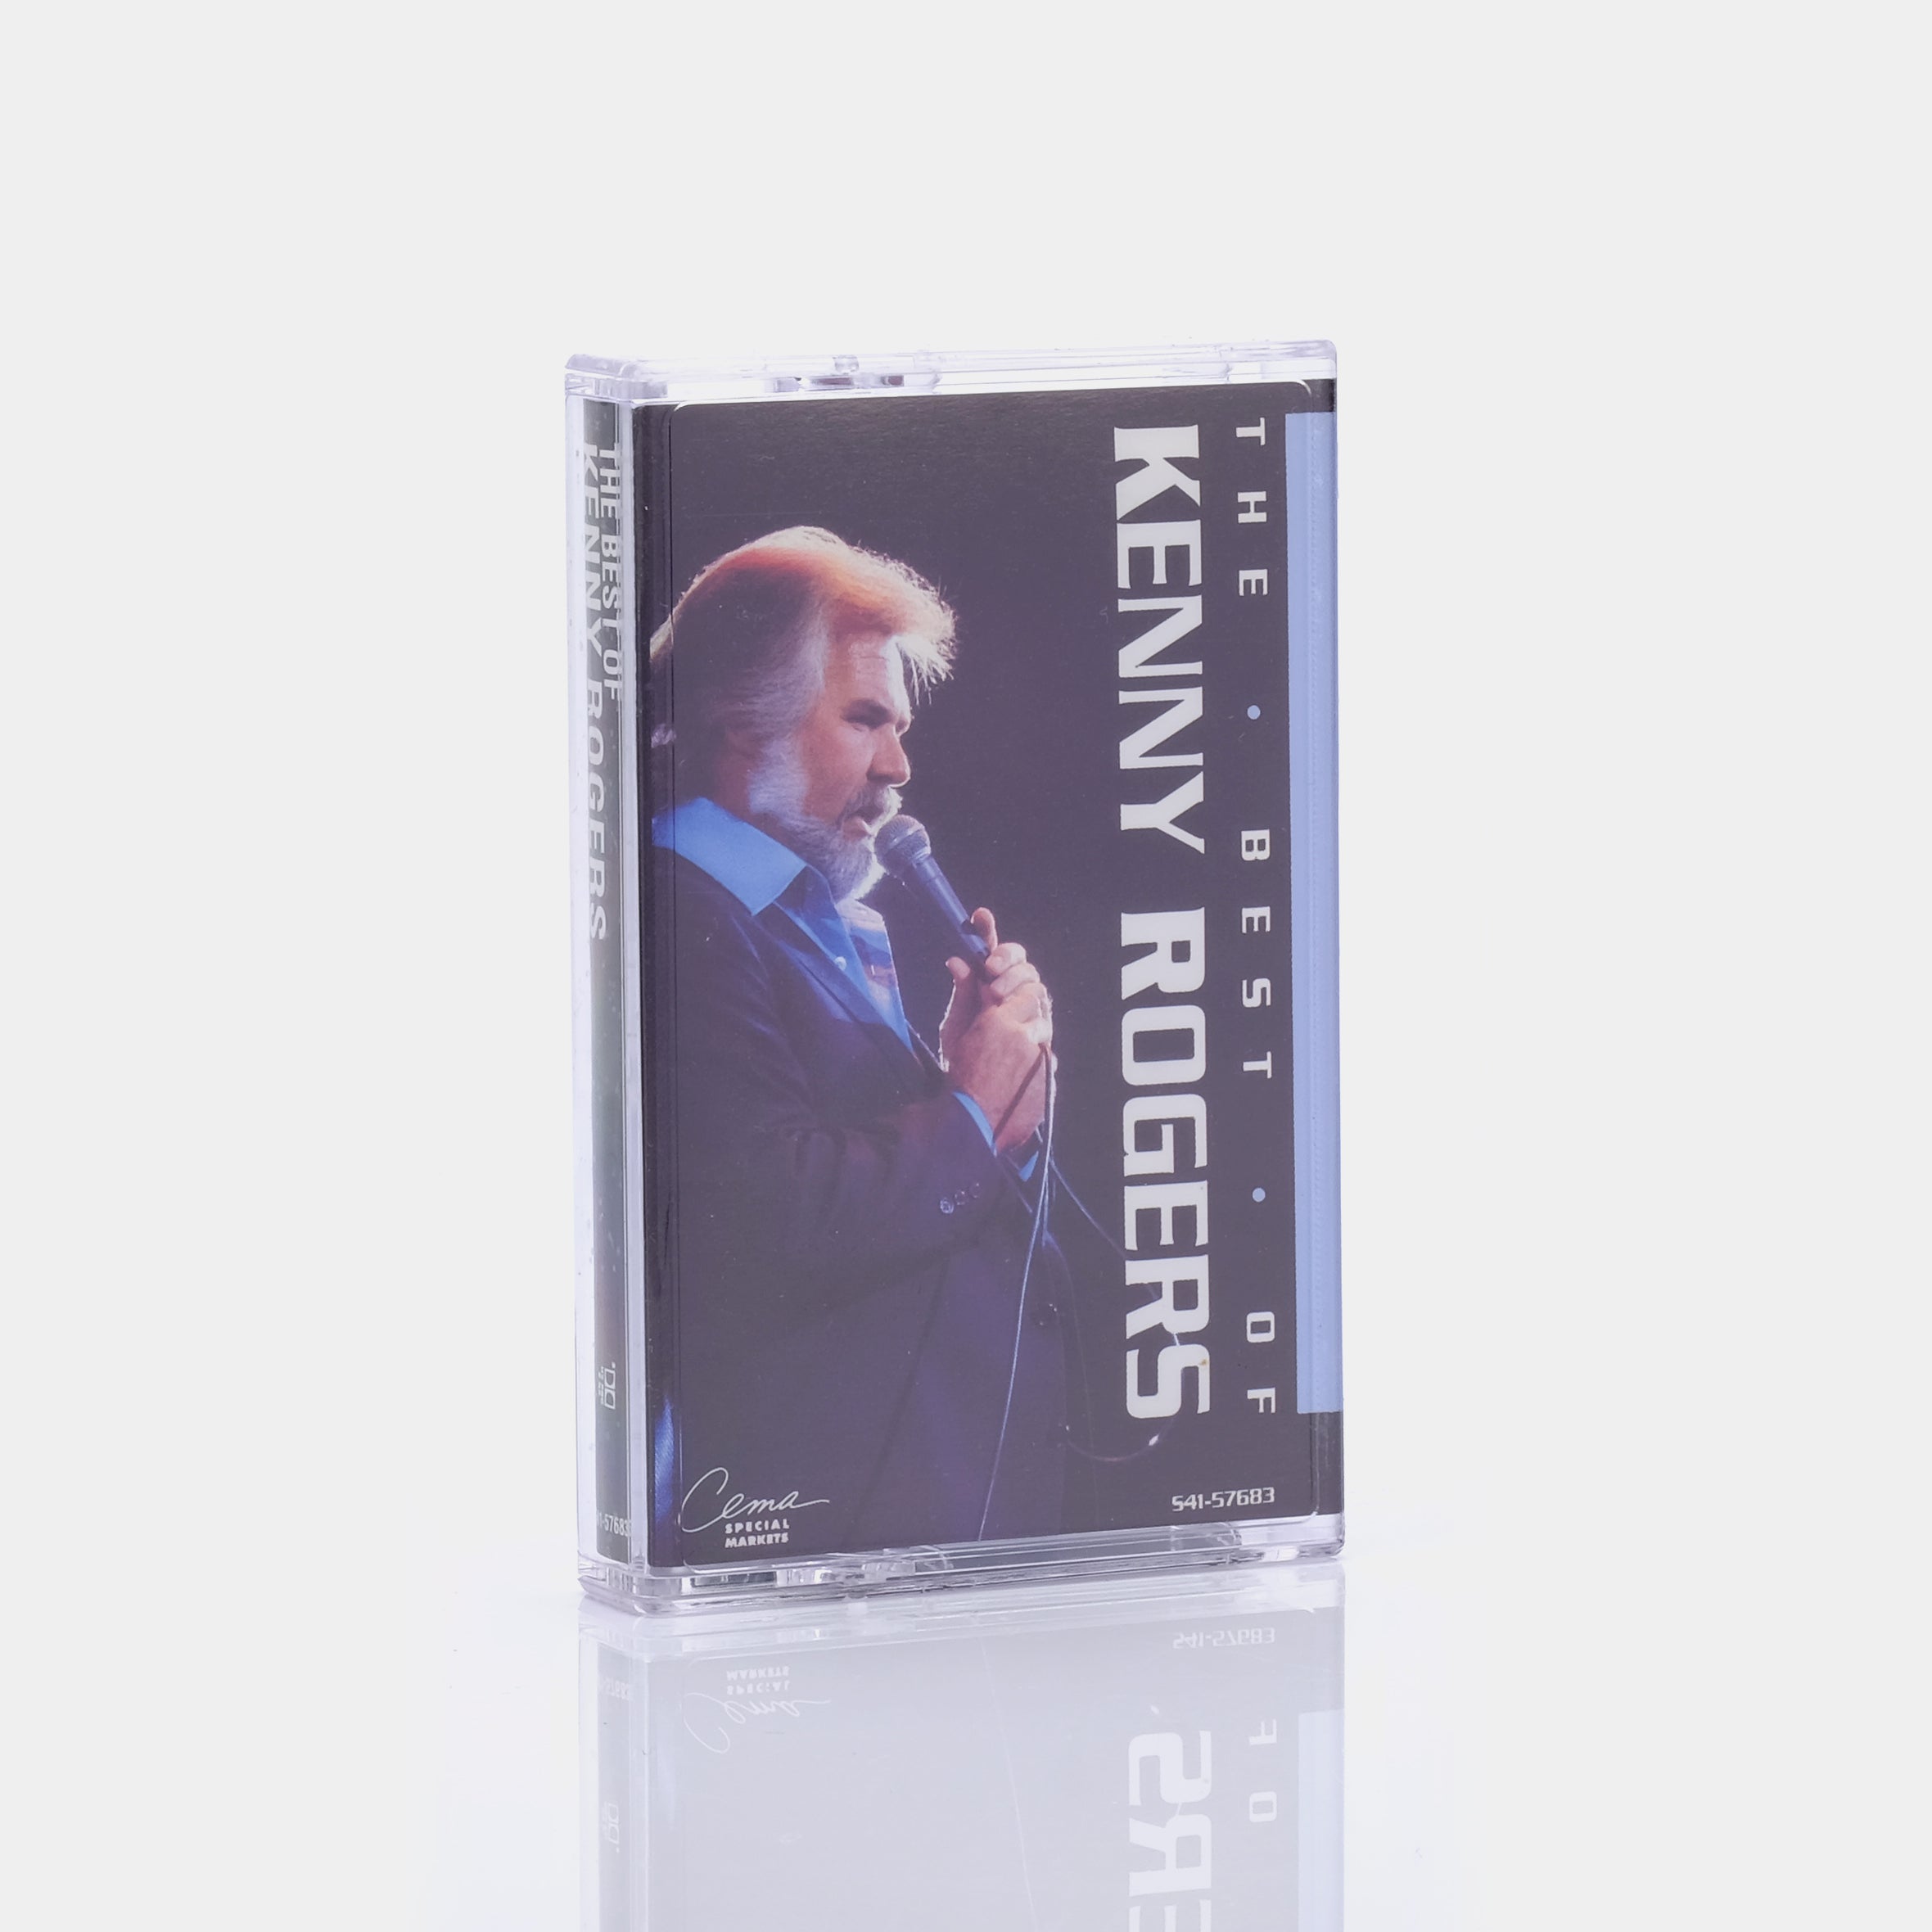 Kenny Rogers - The Best Of Kenny Rogers Cassette Tape